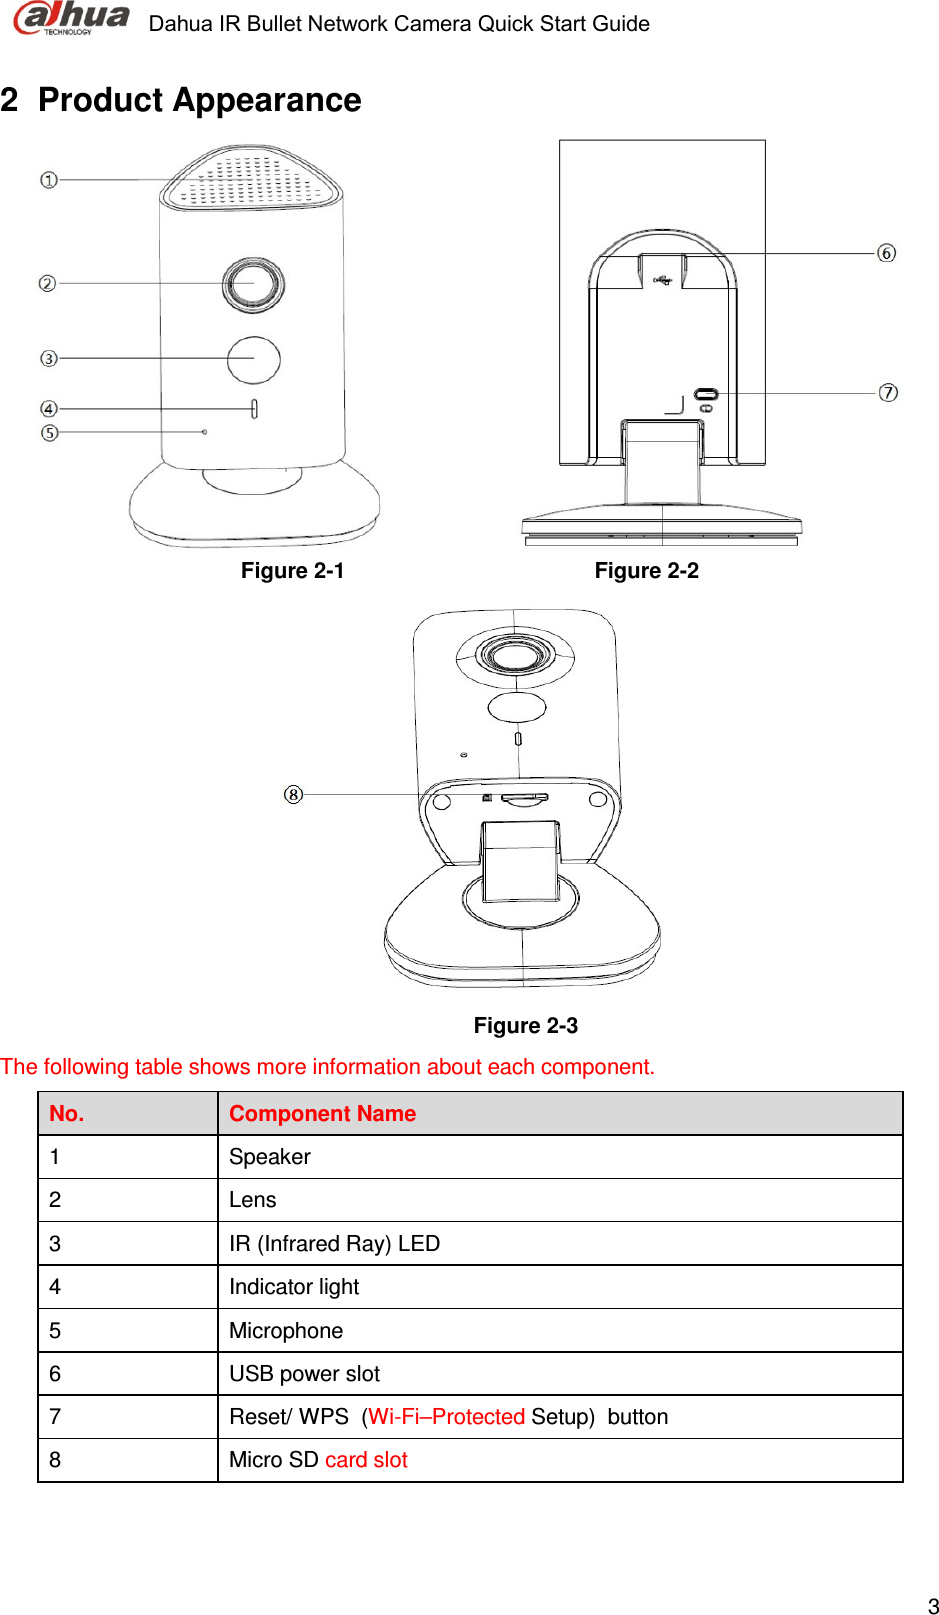     Dahua IR Bullet Network Camera Quick Start Guide    32  Product Appearance                Figure 2-1                                         Figure 2-2                                                     Figure 2-3  The following table shows more information about each component. No.  Component Name 1  Speaker  2  Lens  3  IR (Infrared Ray) LED  4  Indicator light  5  Microphone 6  USB power slot  7  Reset/ WPS  (Wi-Fi–Protected Setup)  button 8  Micro SD card slot  